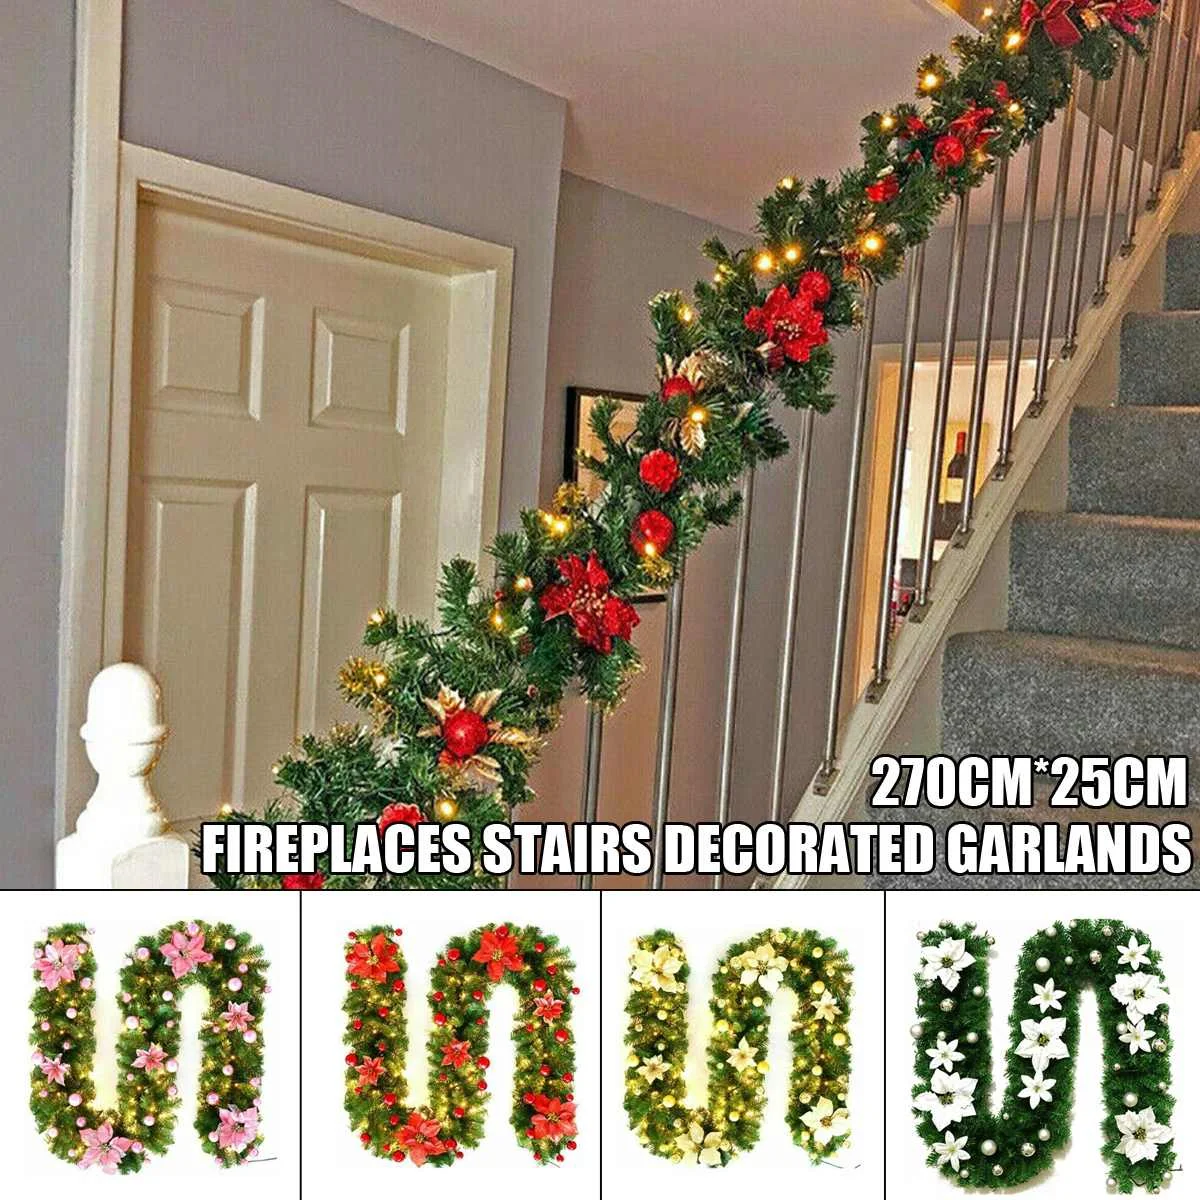 

2.7M Christmas Decorations Garland Rattan Lights Wreath Decorated Mantel Fireplace Stairs Wall Door Pine Tree LED Light Up Decor